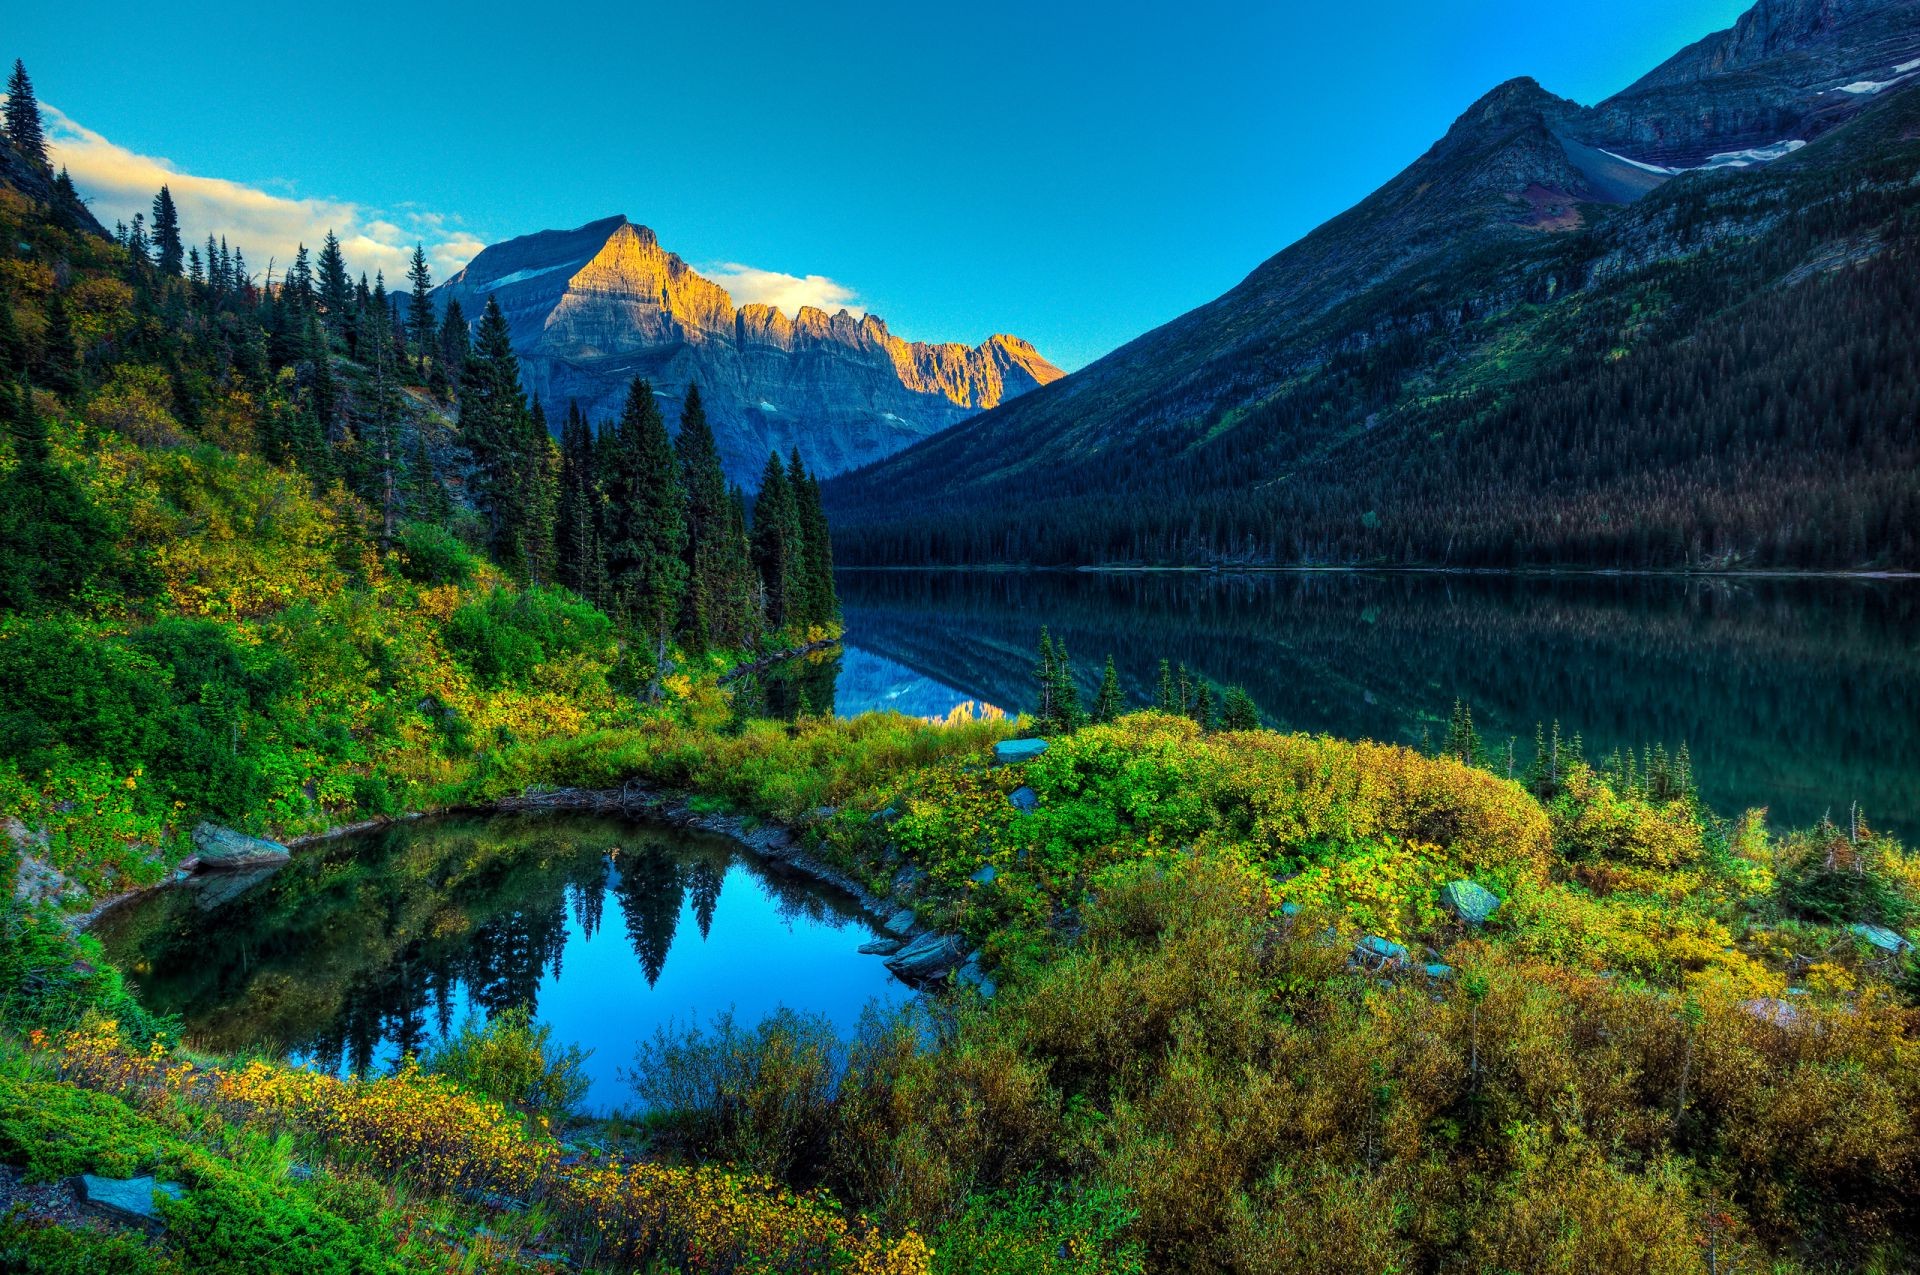 rivers ponds and streams mountain water landscape lake nature wood travel scenic outdoors tree river sky valley fall